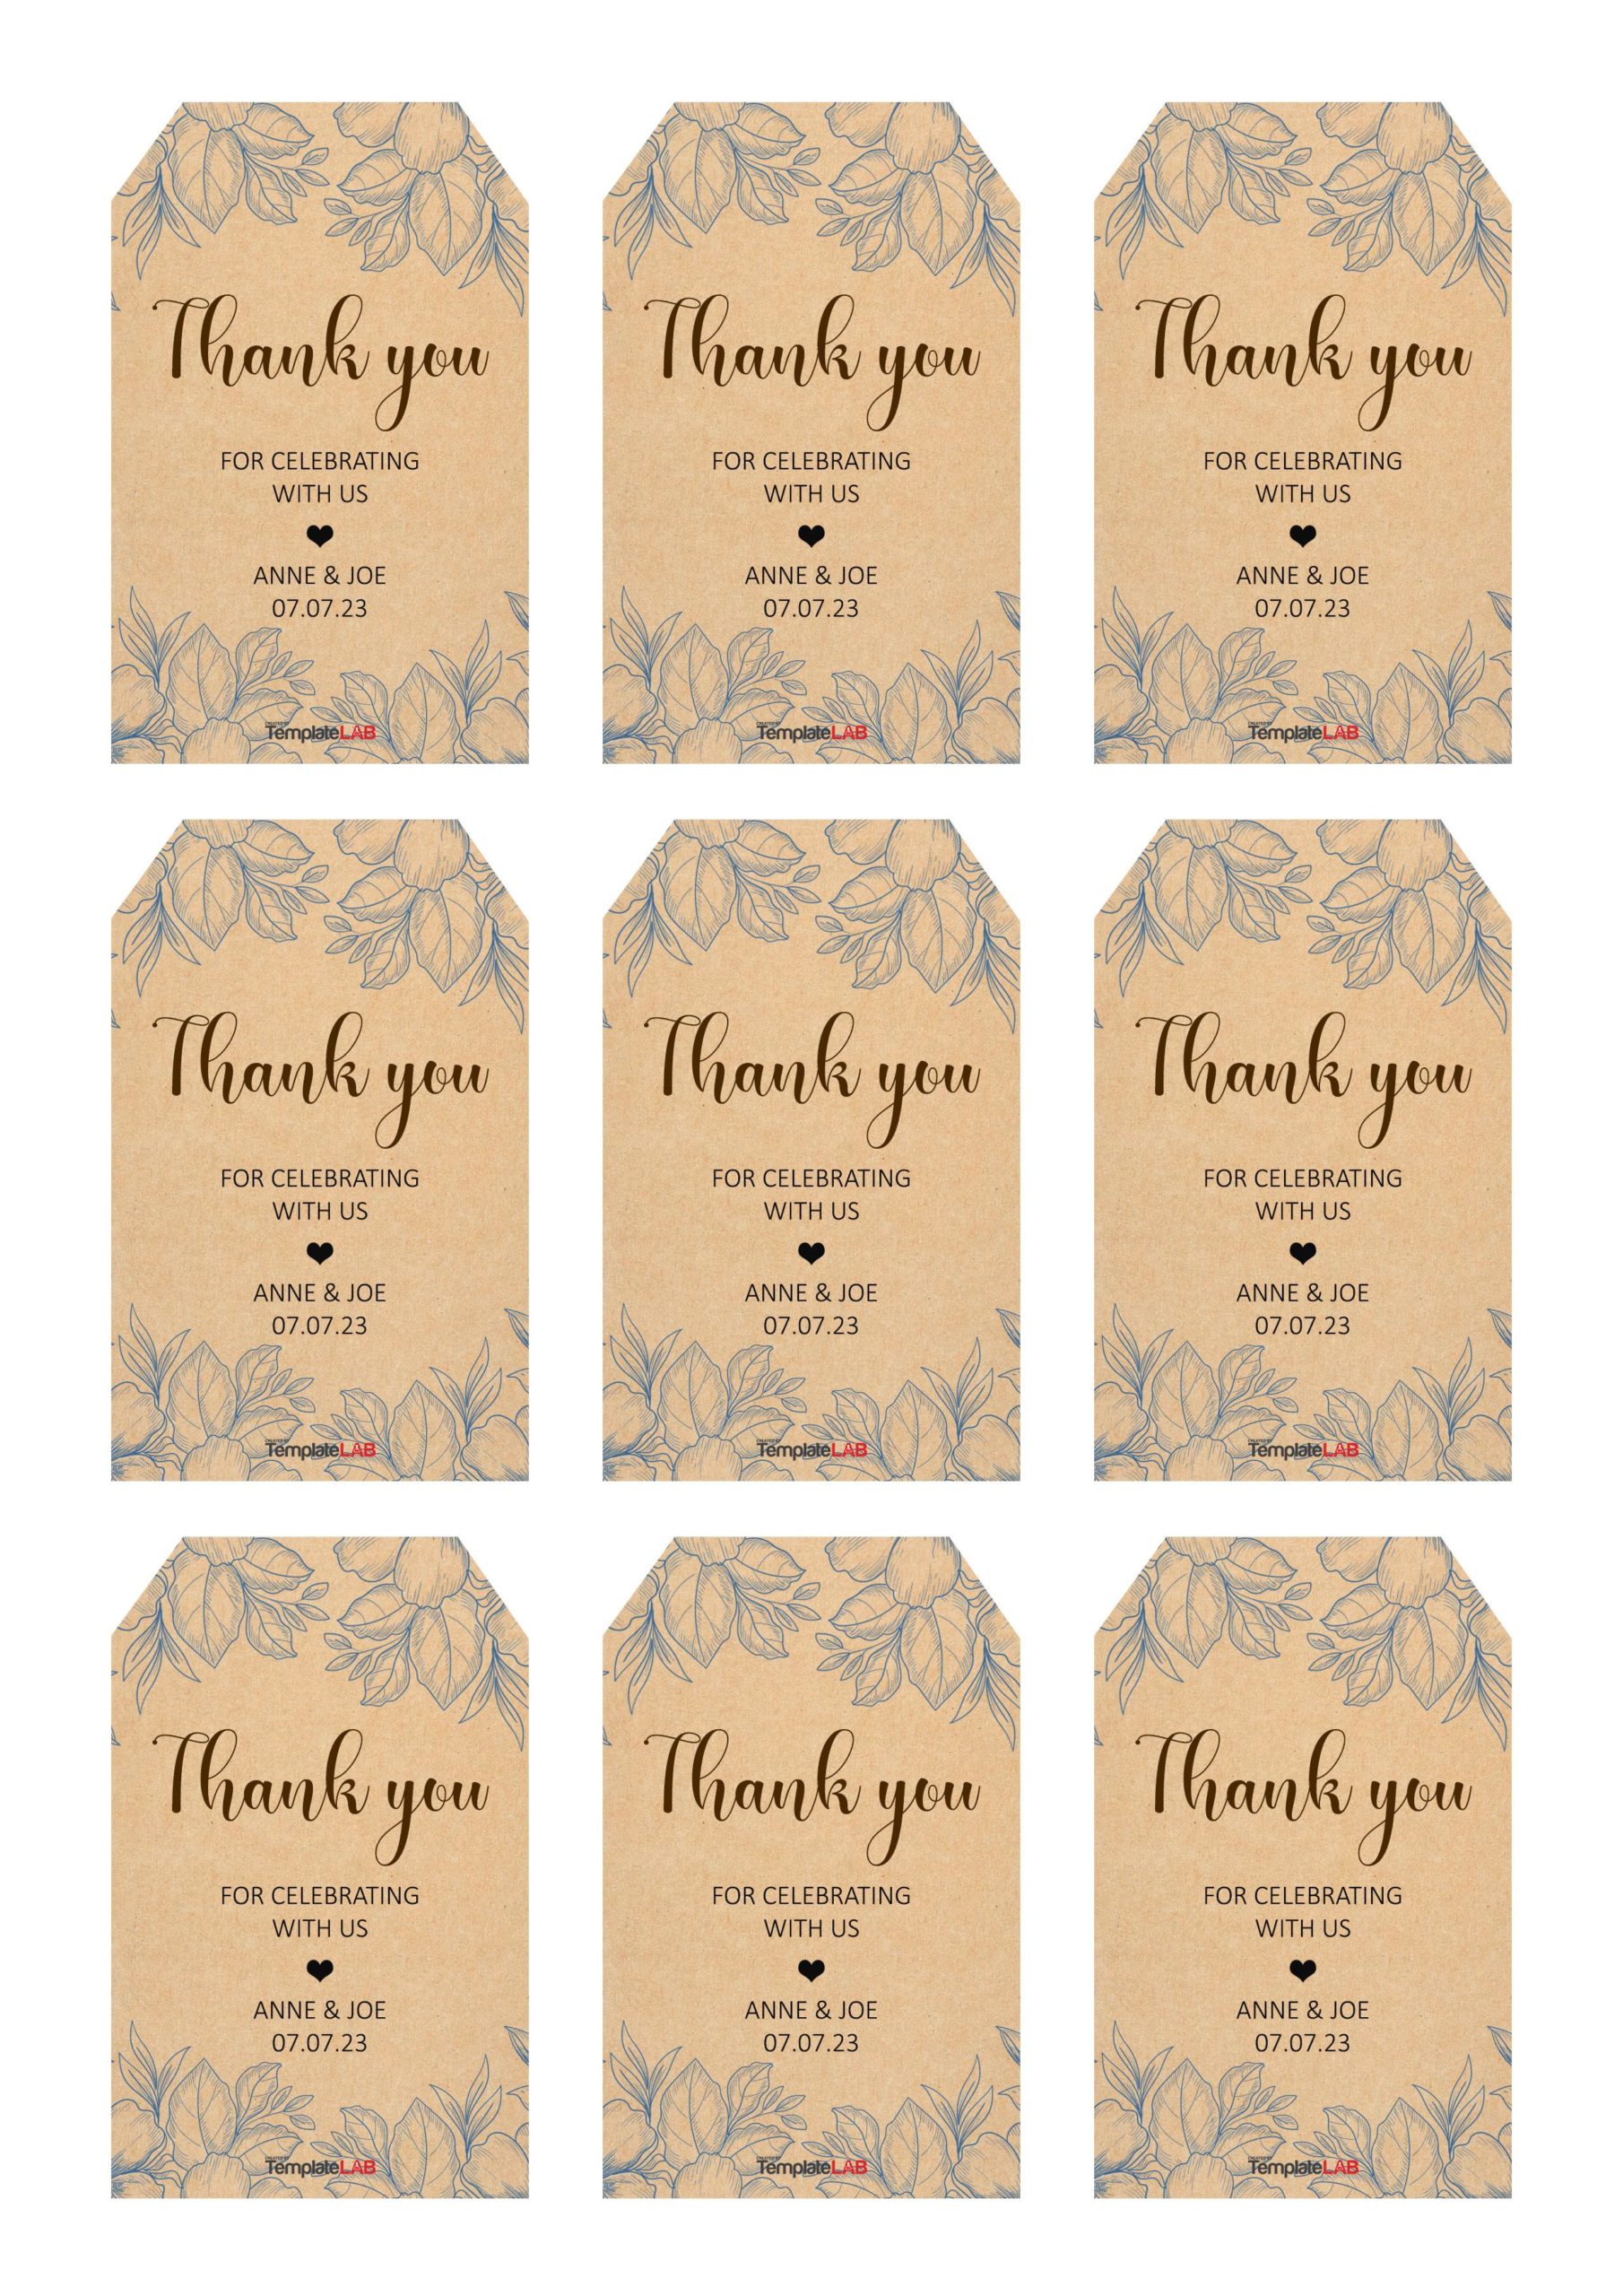 19 Free Editable Gift Tag Templates [Word, PPTX, PSD]